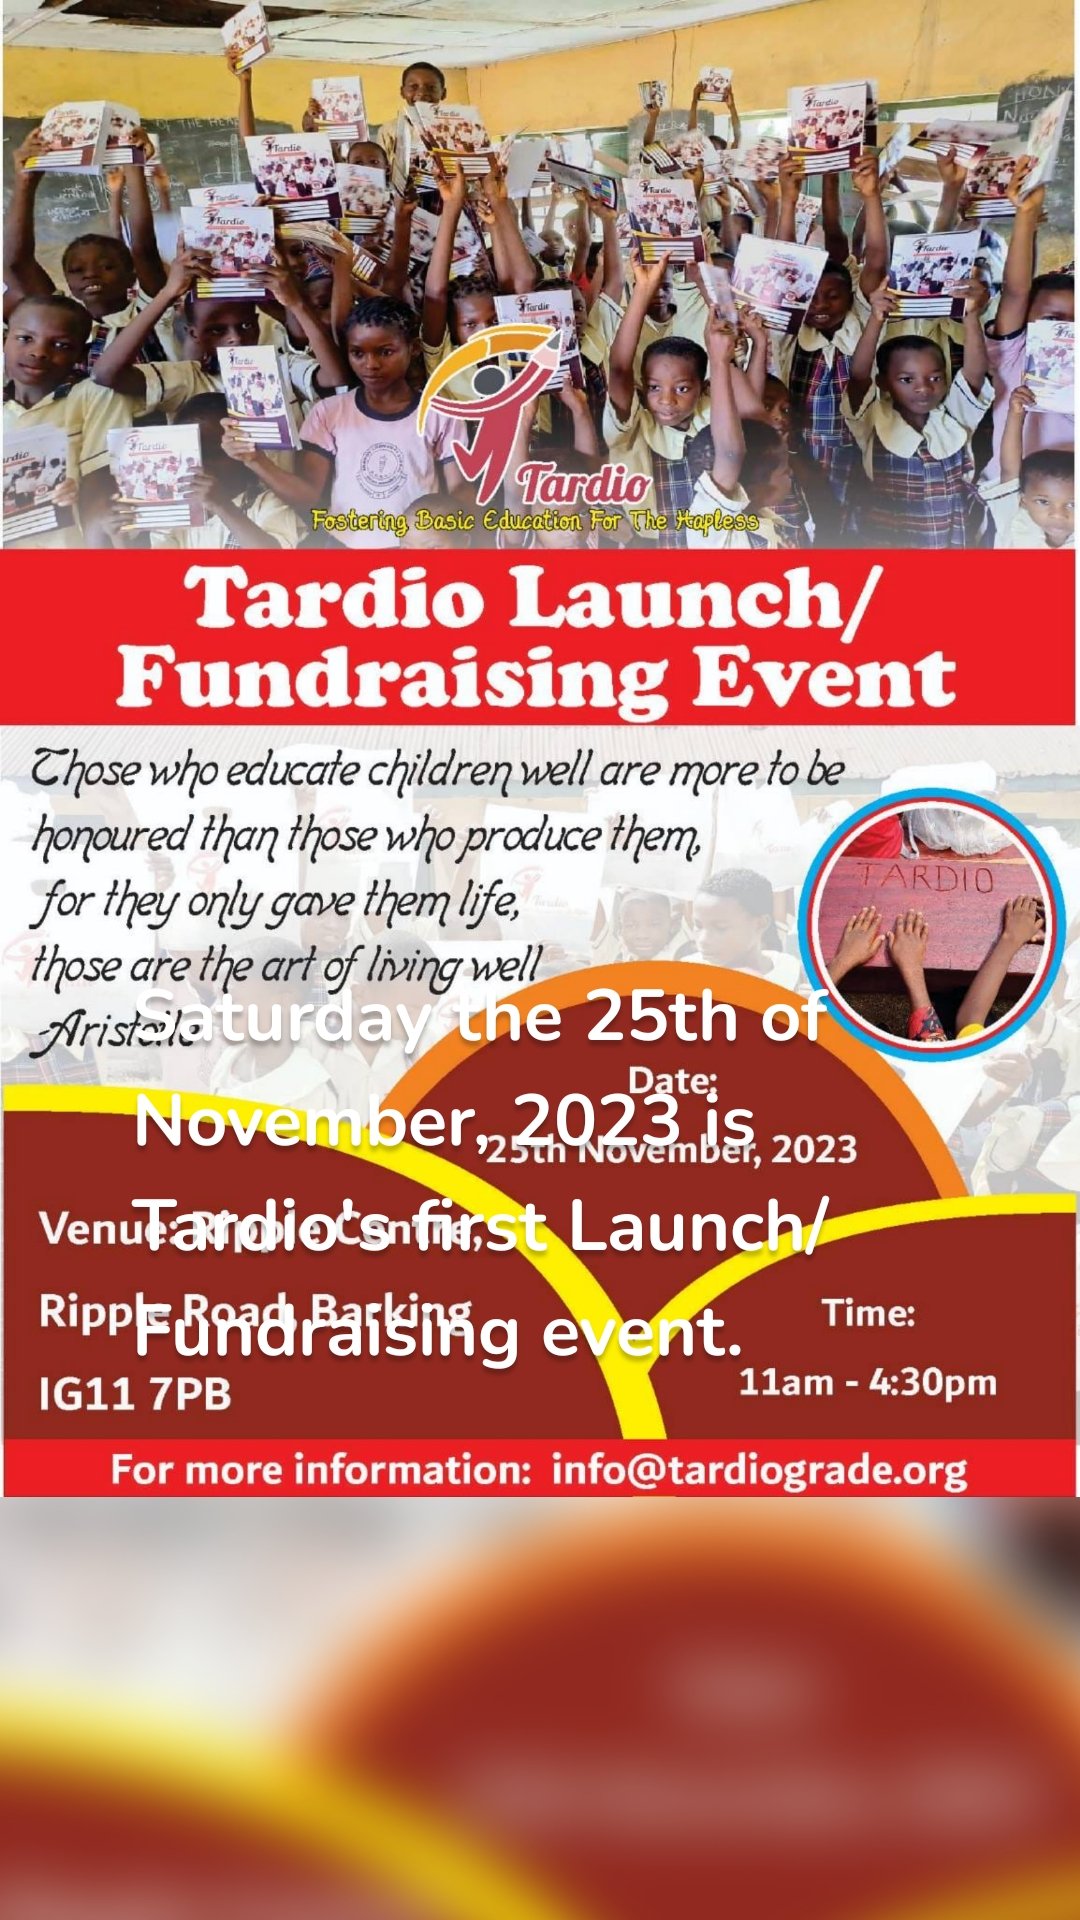 Saturday the 25th of November, 2023 is Tardio's first Launch/Fundraising event. 